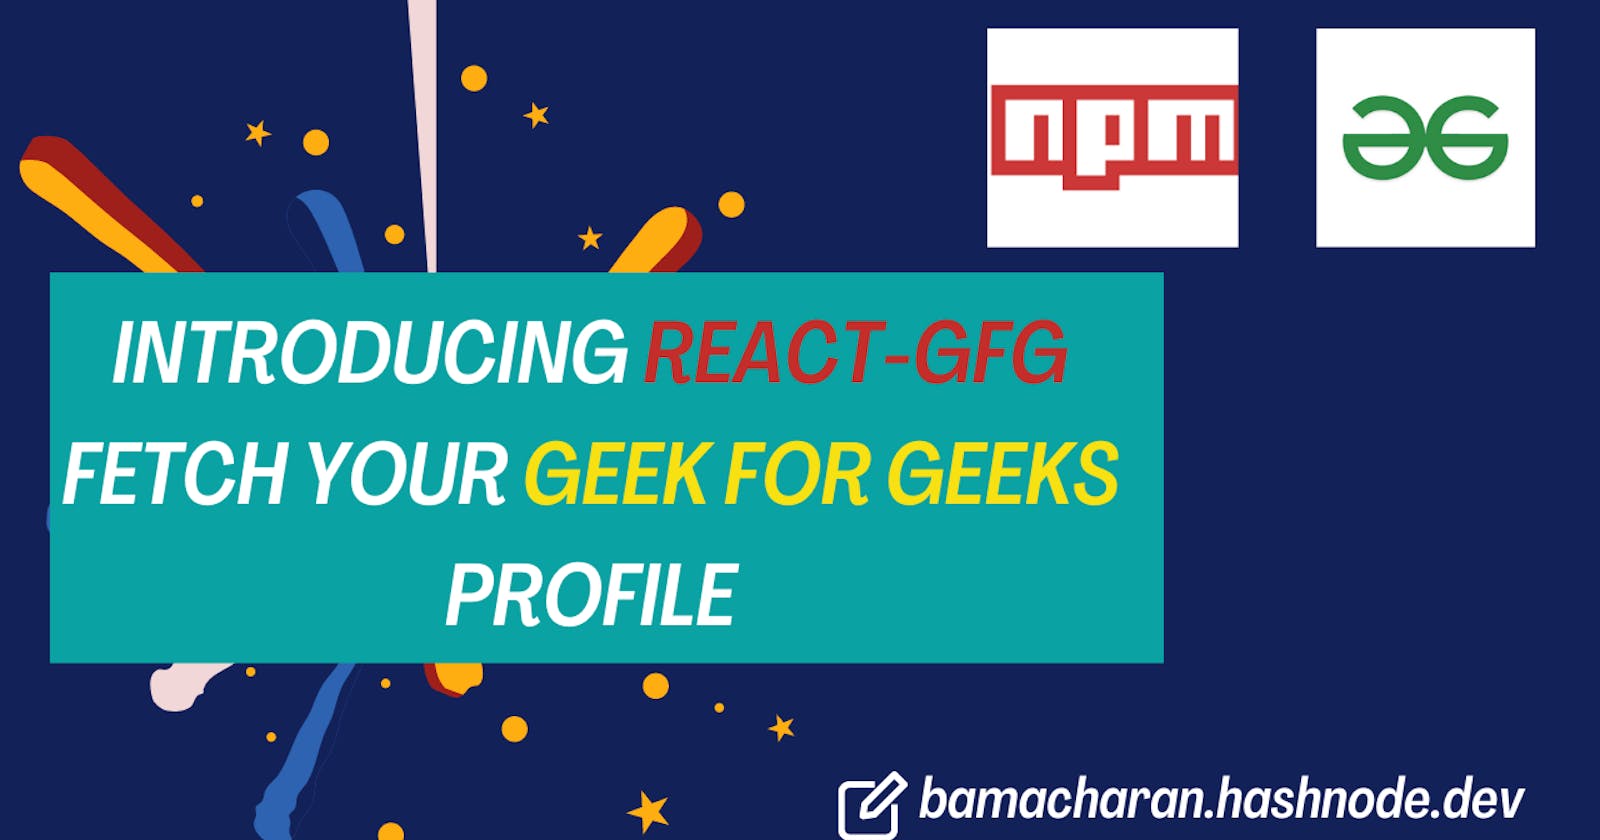 Introducing react-gfg: Fetch Your Geek for Geeks Profile Details with Ease